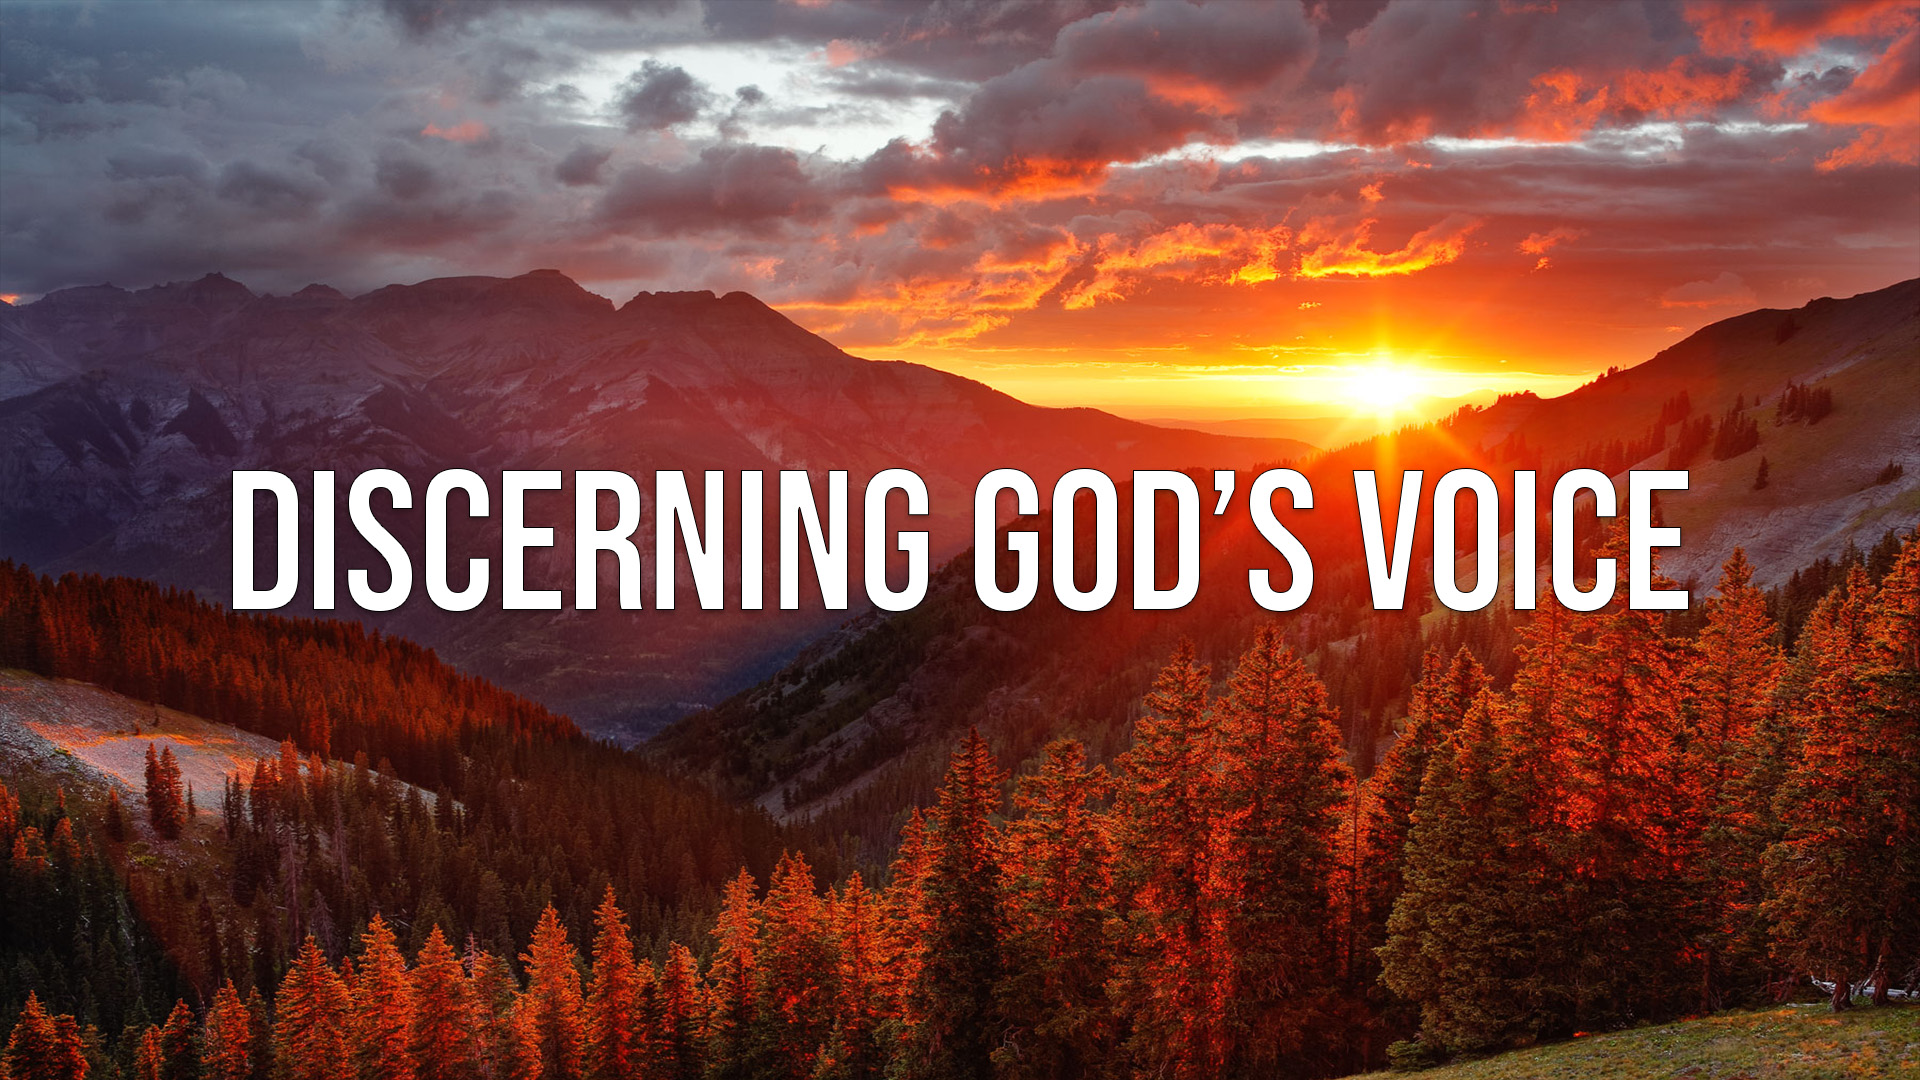 Discerning God's Voice Together - God's Voice is Persistent